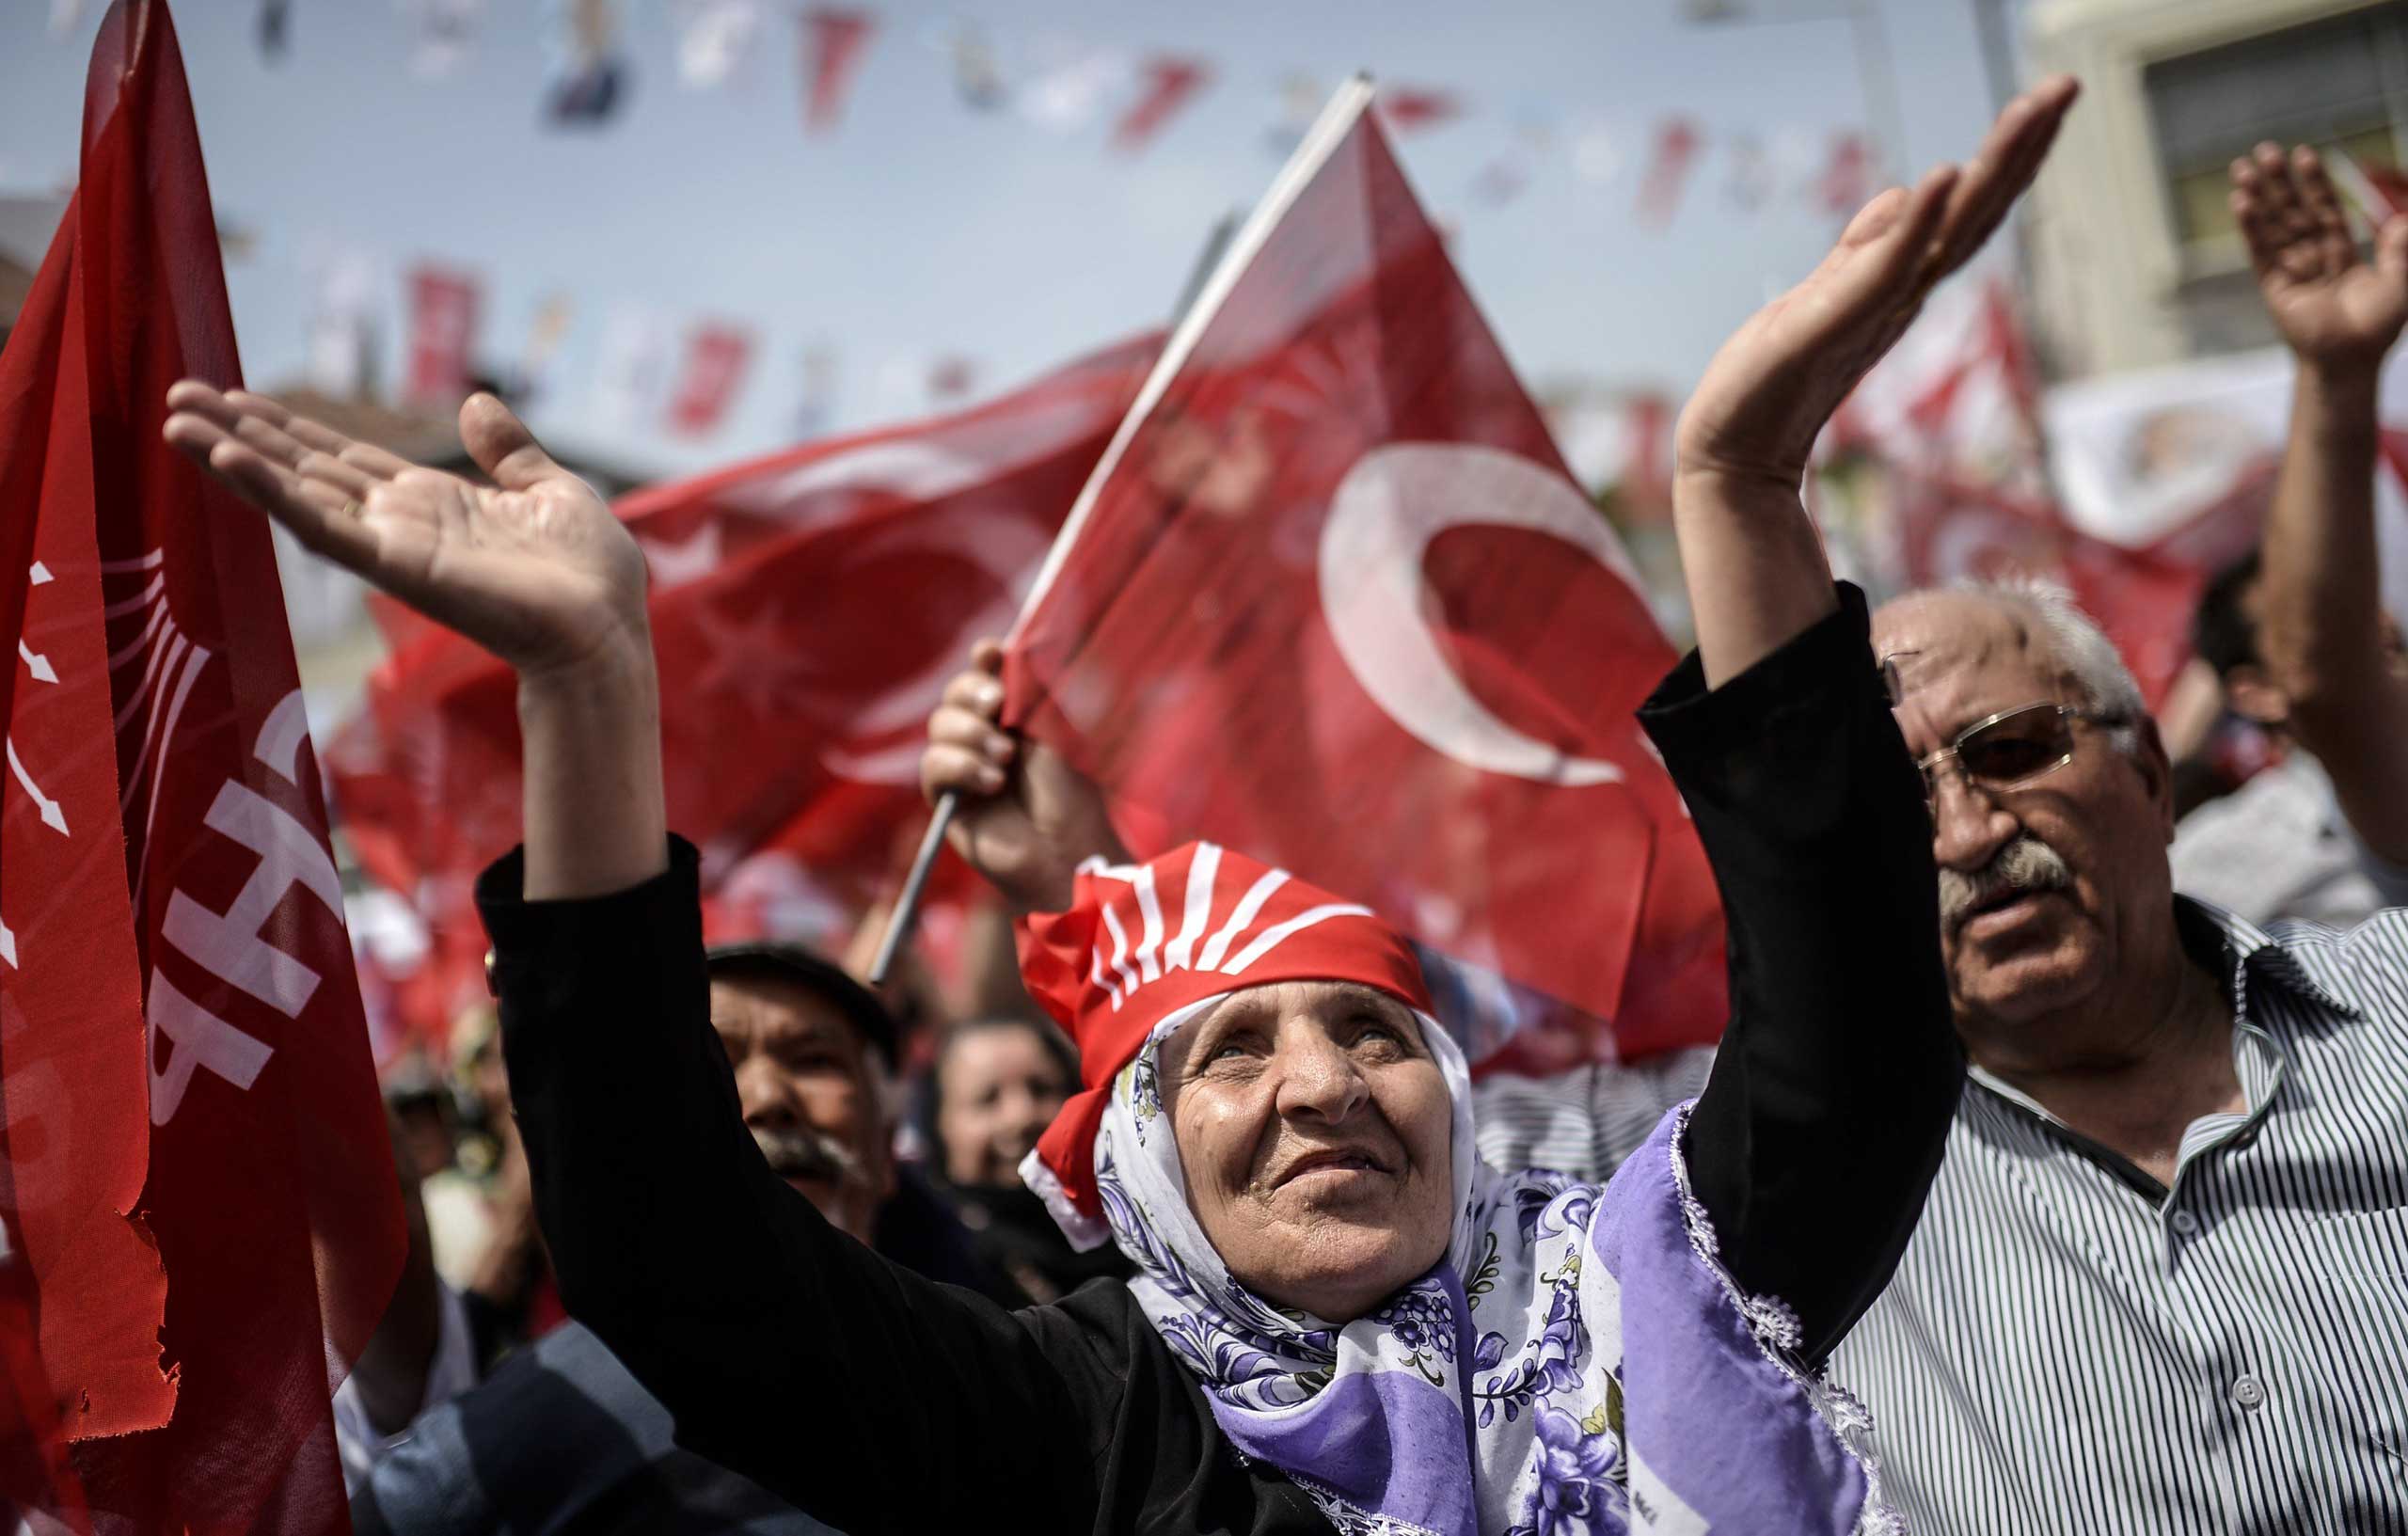 Supporters of Turkey's main opposition party, the Republican People’s Party (CHP) cheer their leader during an election rally ahead of the legislative election in Istanbul on May 24, 2015. (Bulent Kilic—AFP/Getty Images)